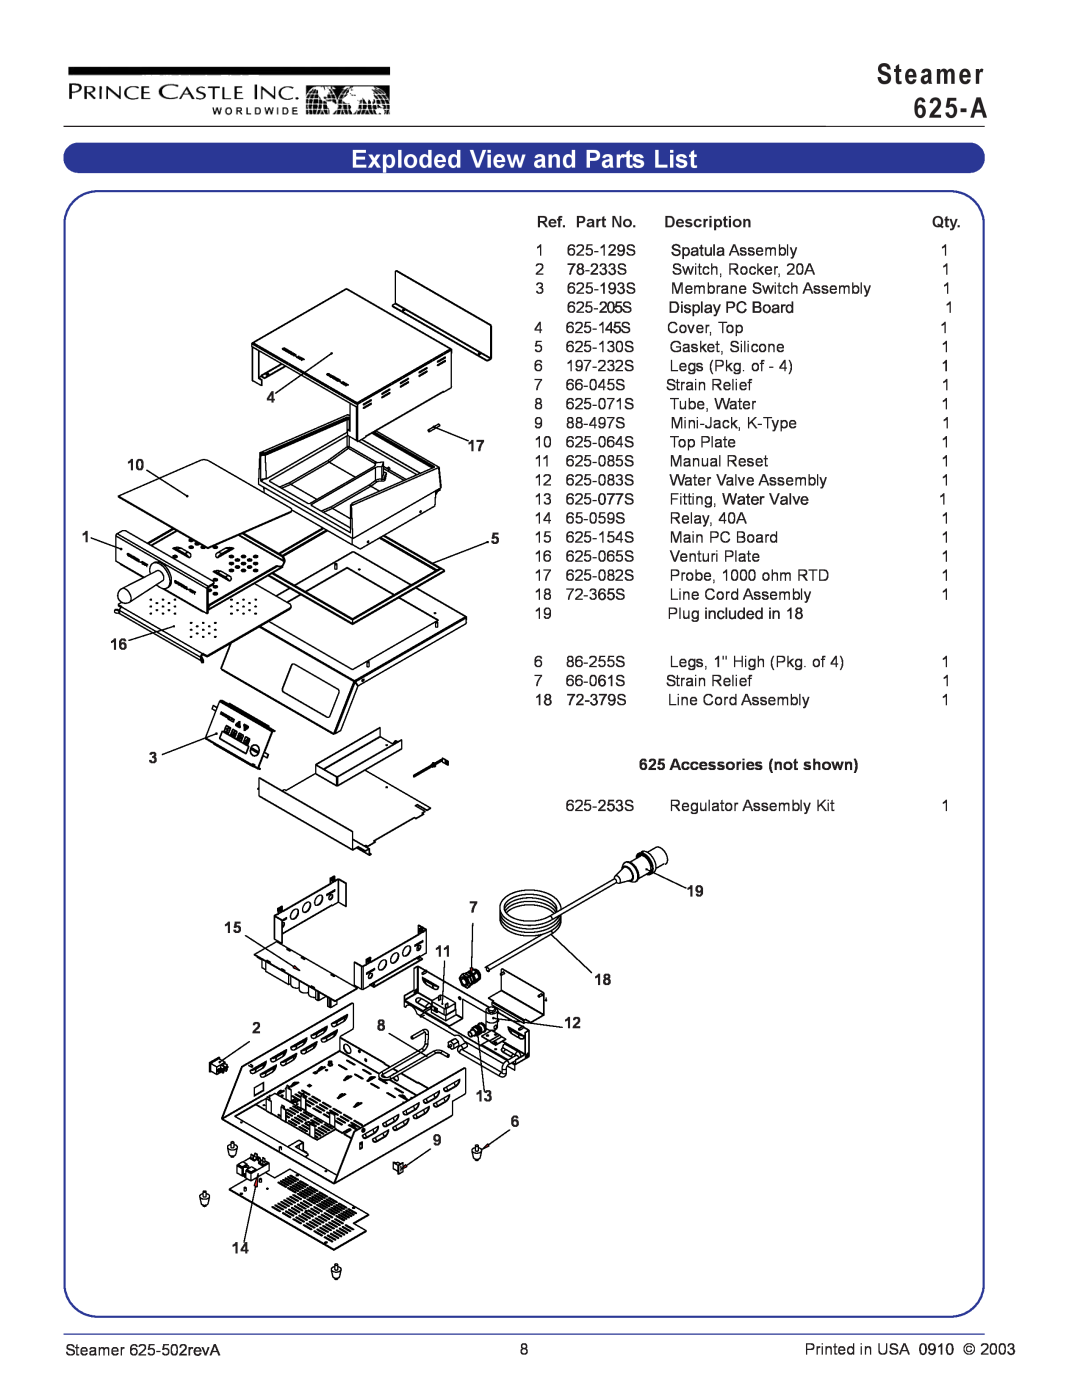 Prince Castle 625-A625-A operation manual Exploded View and Parts List, S t e a m e r 6 2 5 - A, Ref. Part No, Description 